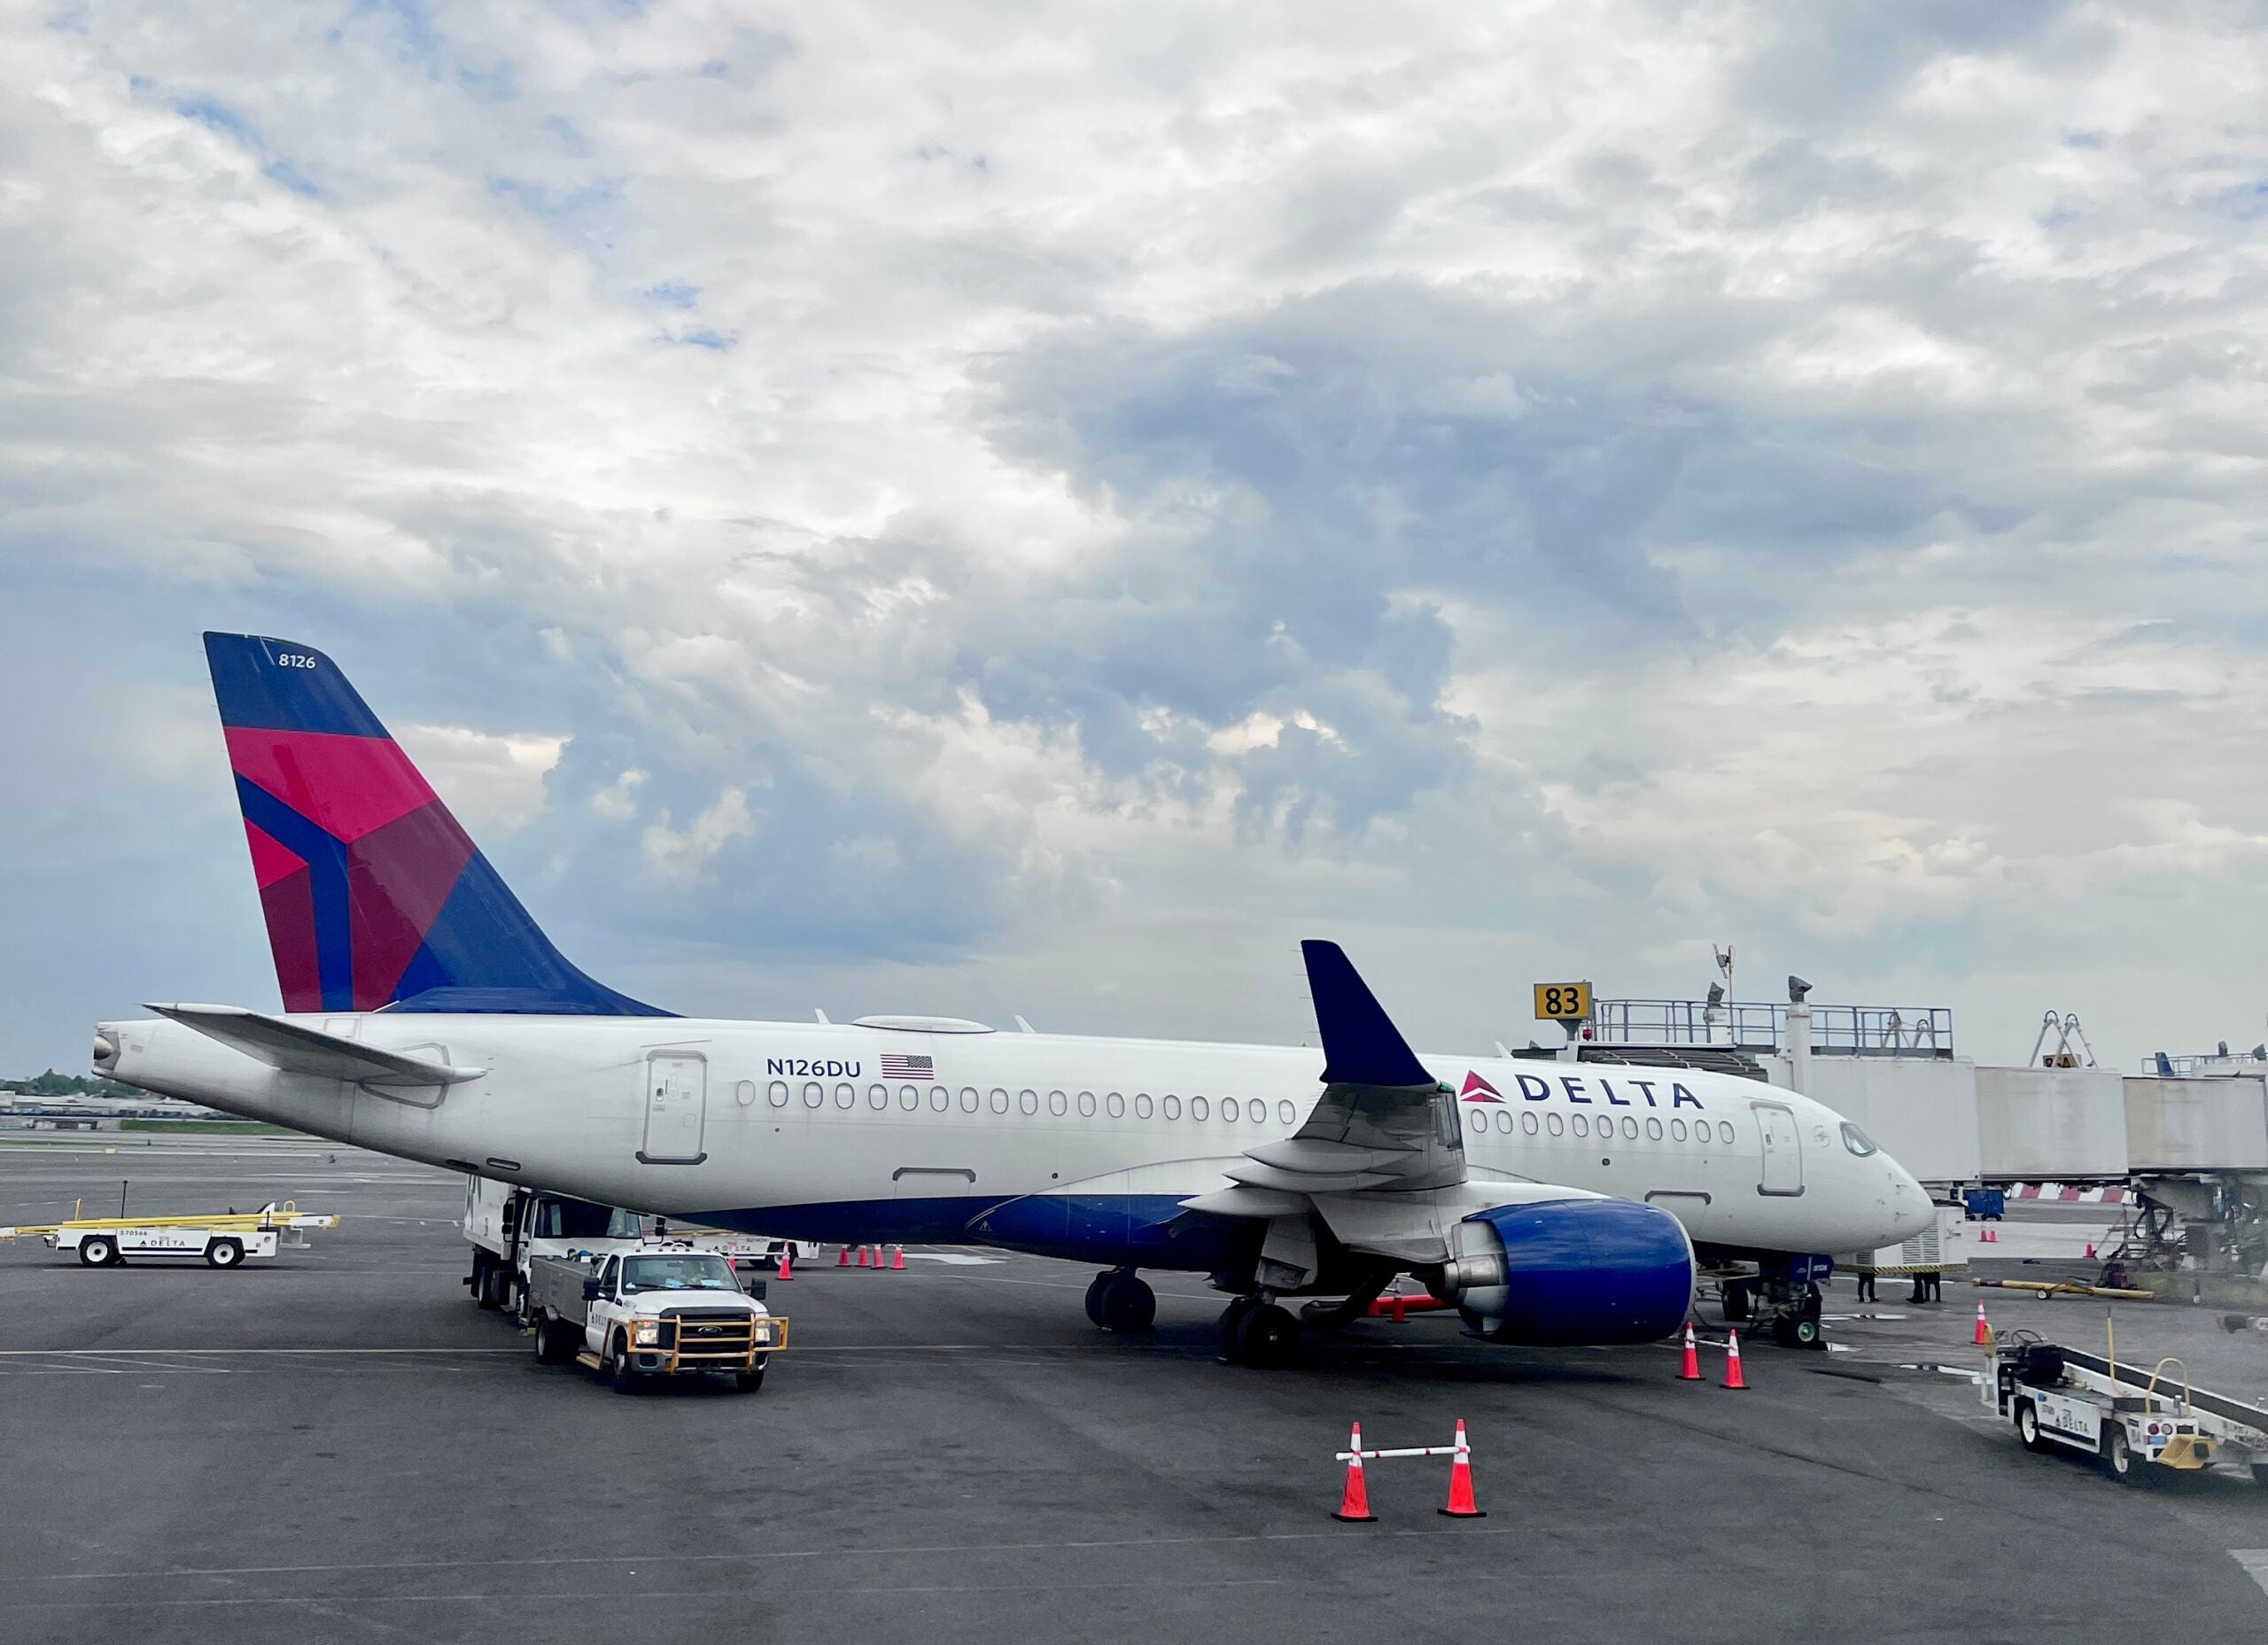 Delta Air Lines Airbus A220 at the gate in New York